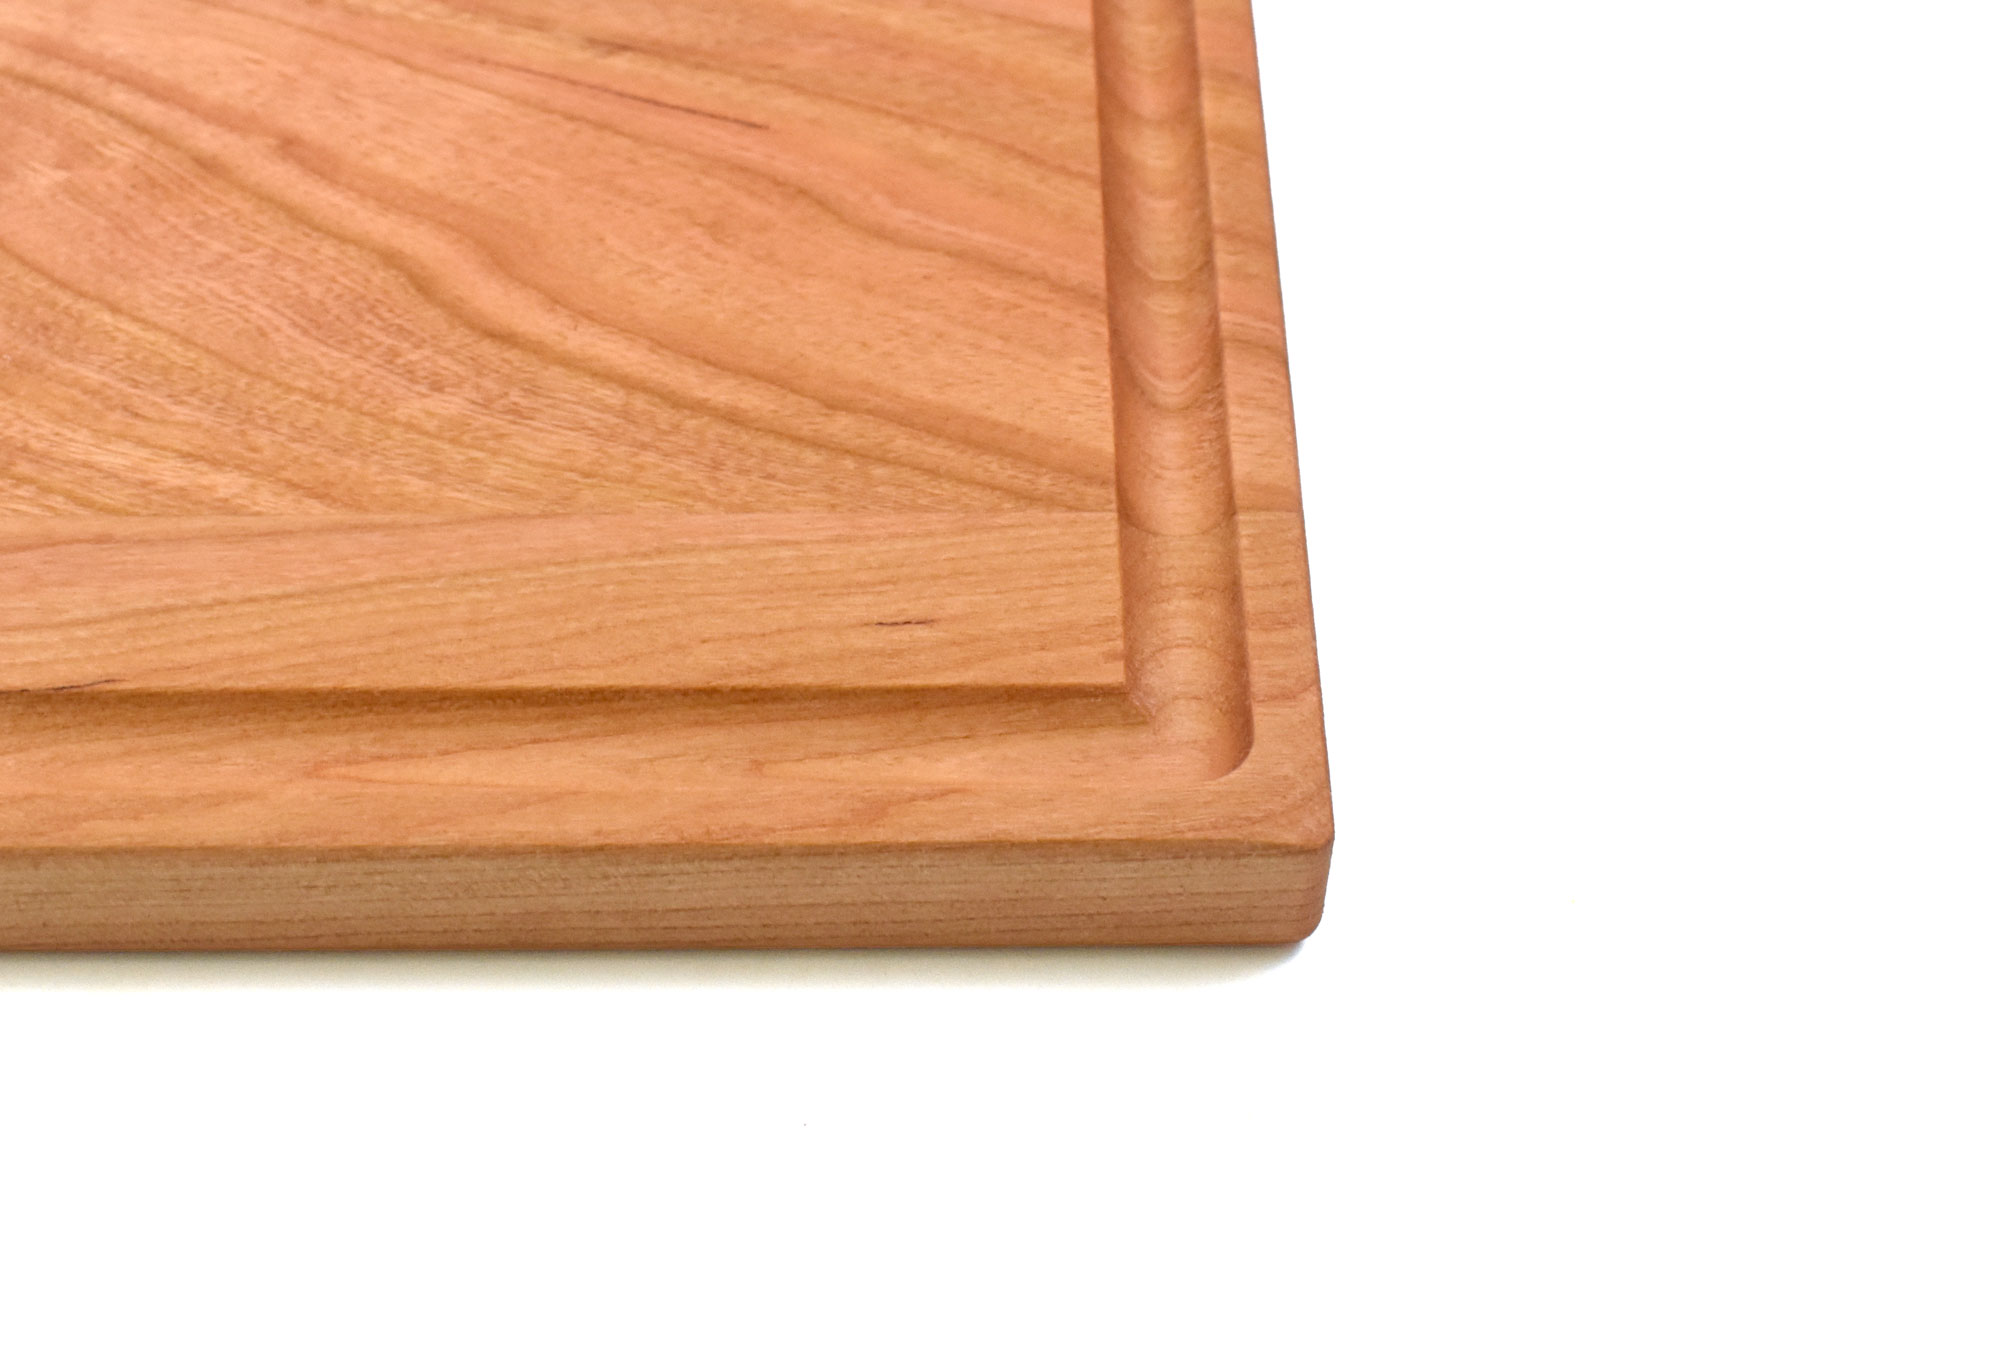 Small cherry board with rounded edges and juice groove